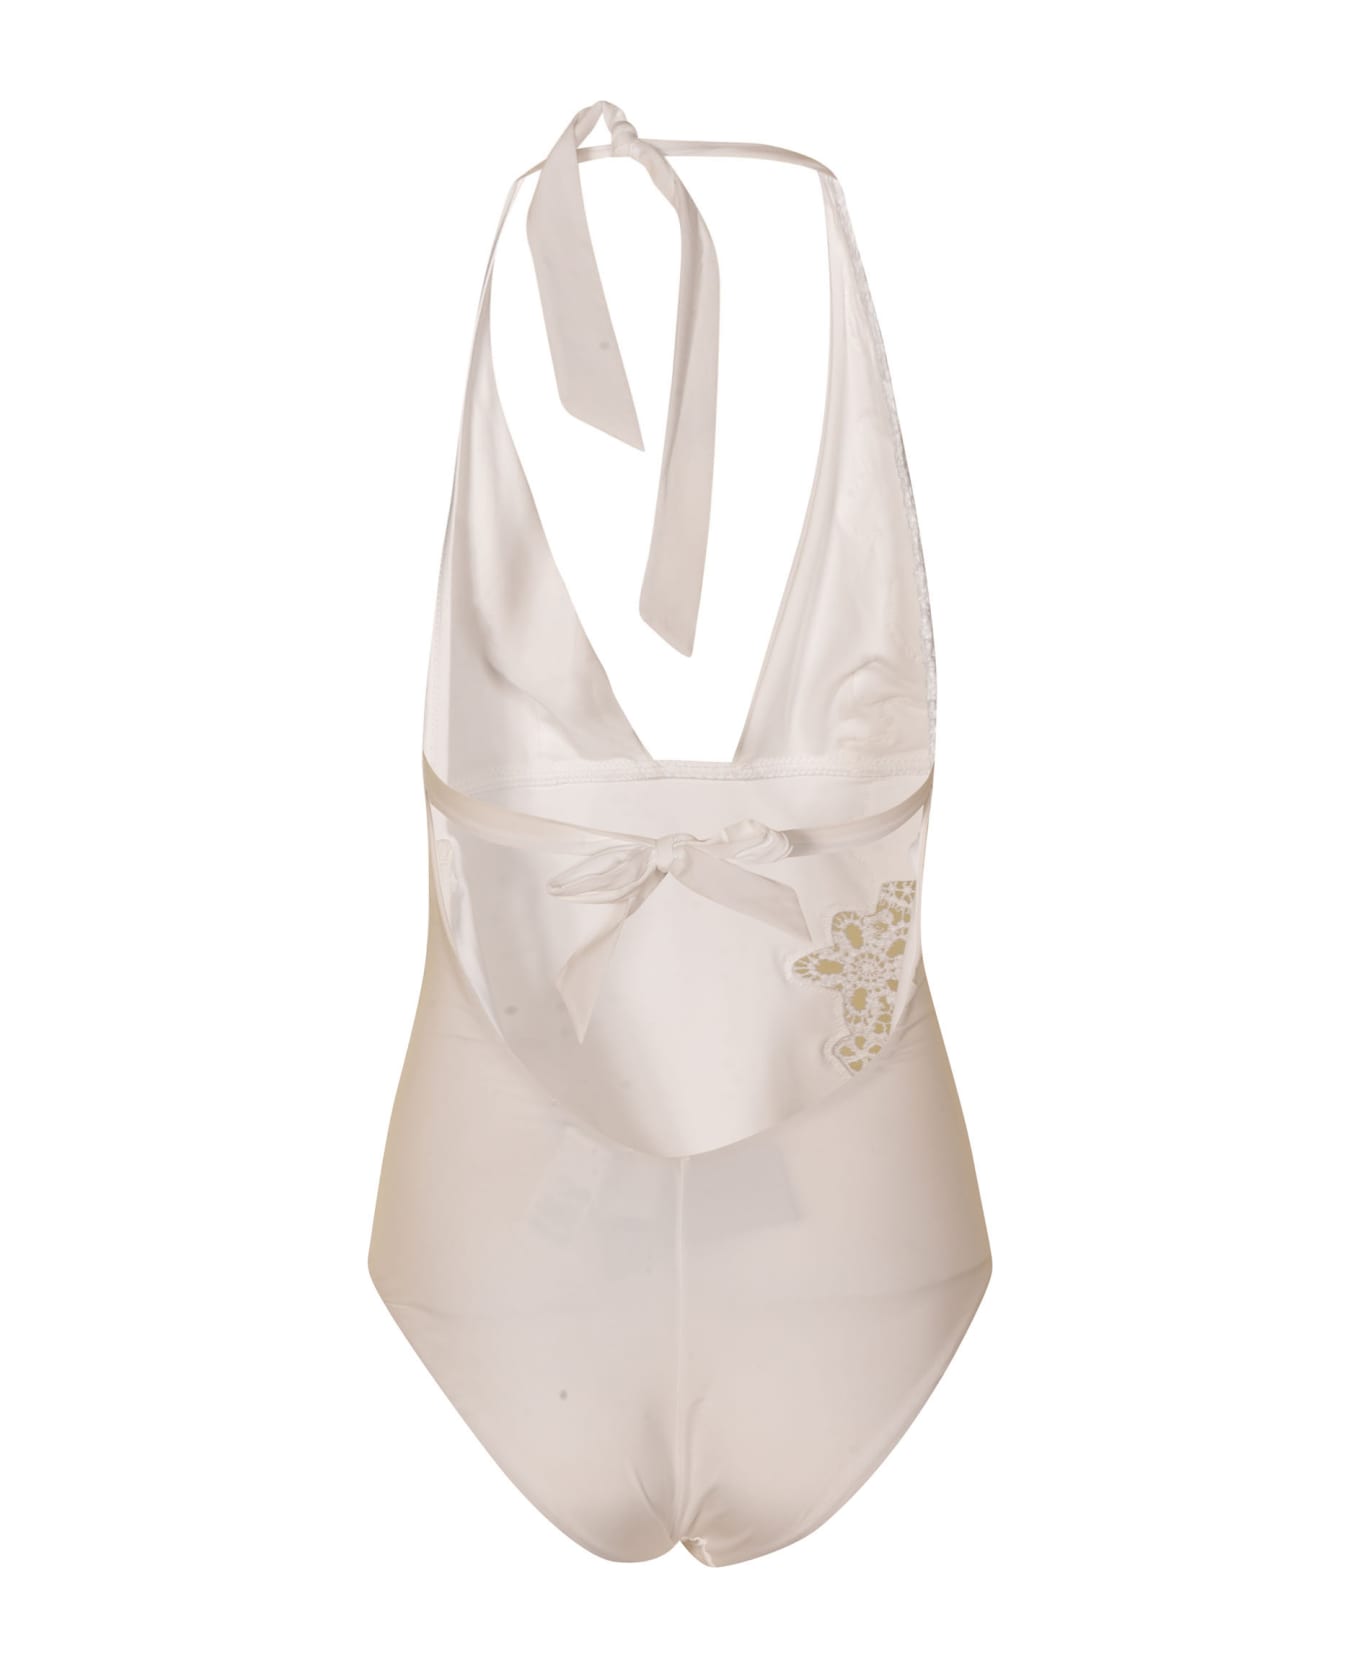 Ermanno Scervino Floral Perforated Swimsuit - White